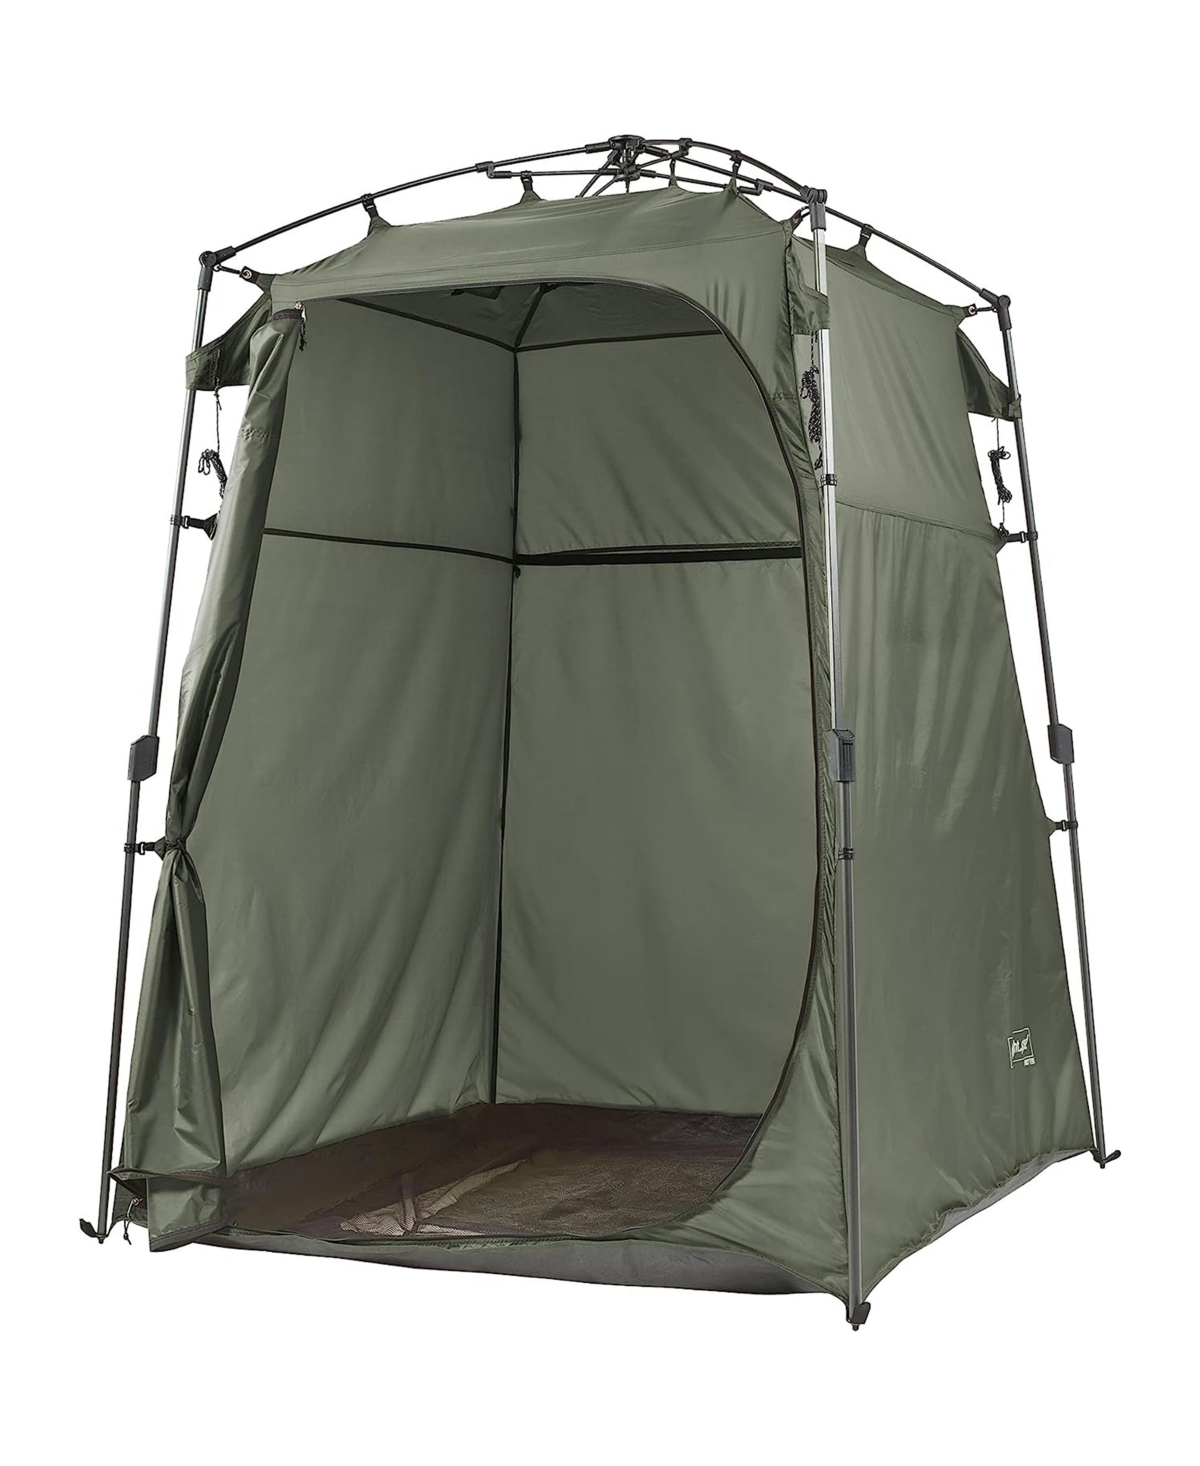 Lightspeed Outdoors 3-in-1 Privacy Tent, Grey - Vintage floral